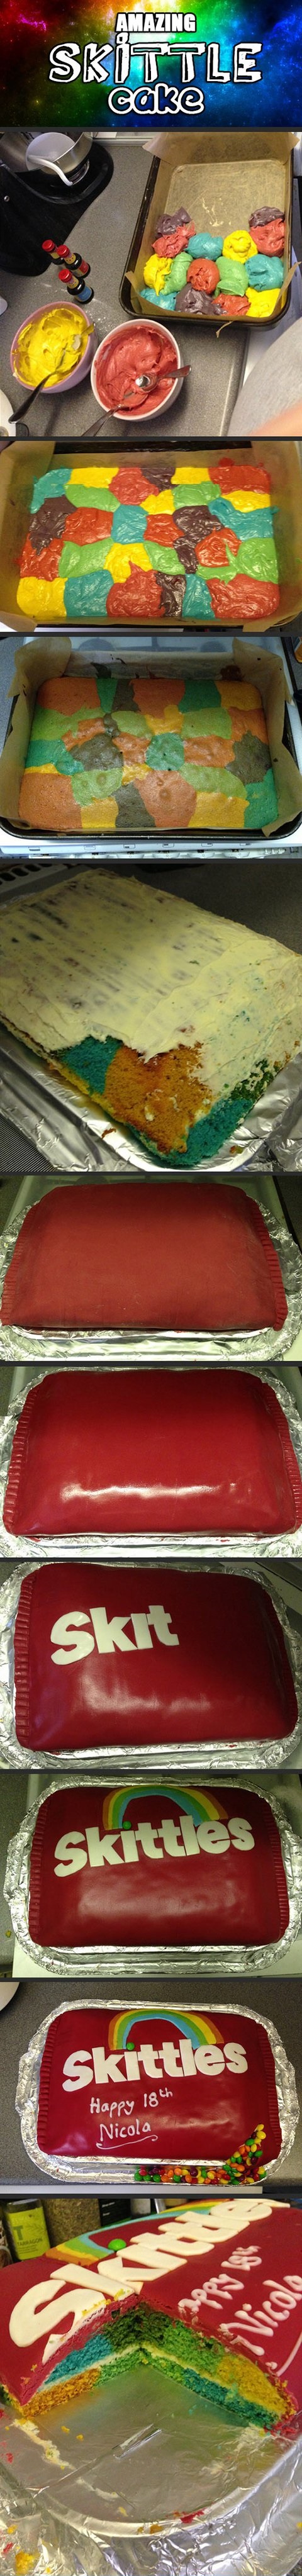 funny-picture-skittle-cake